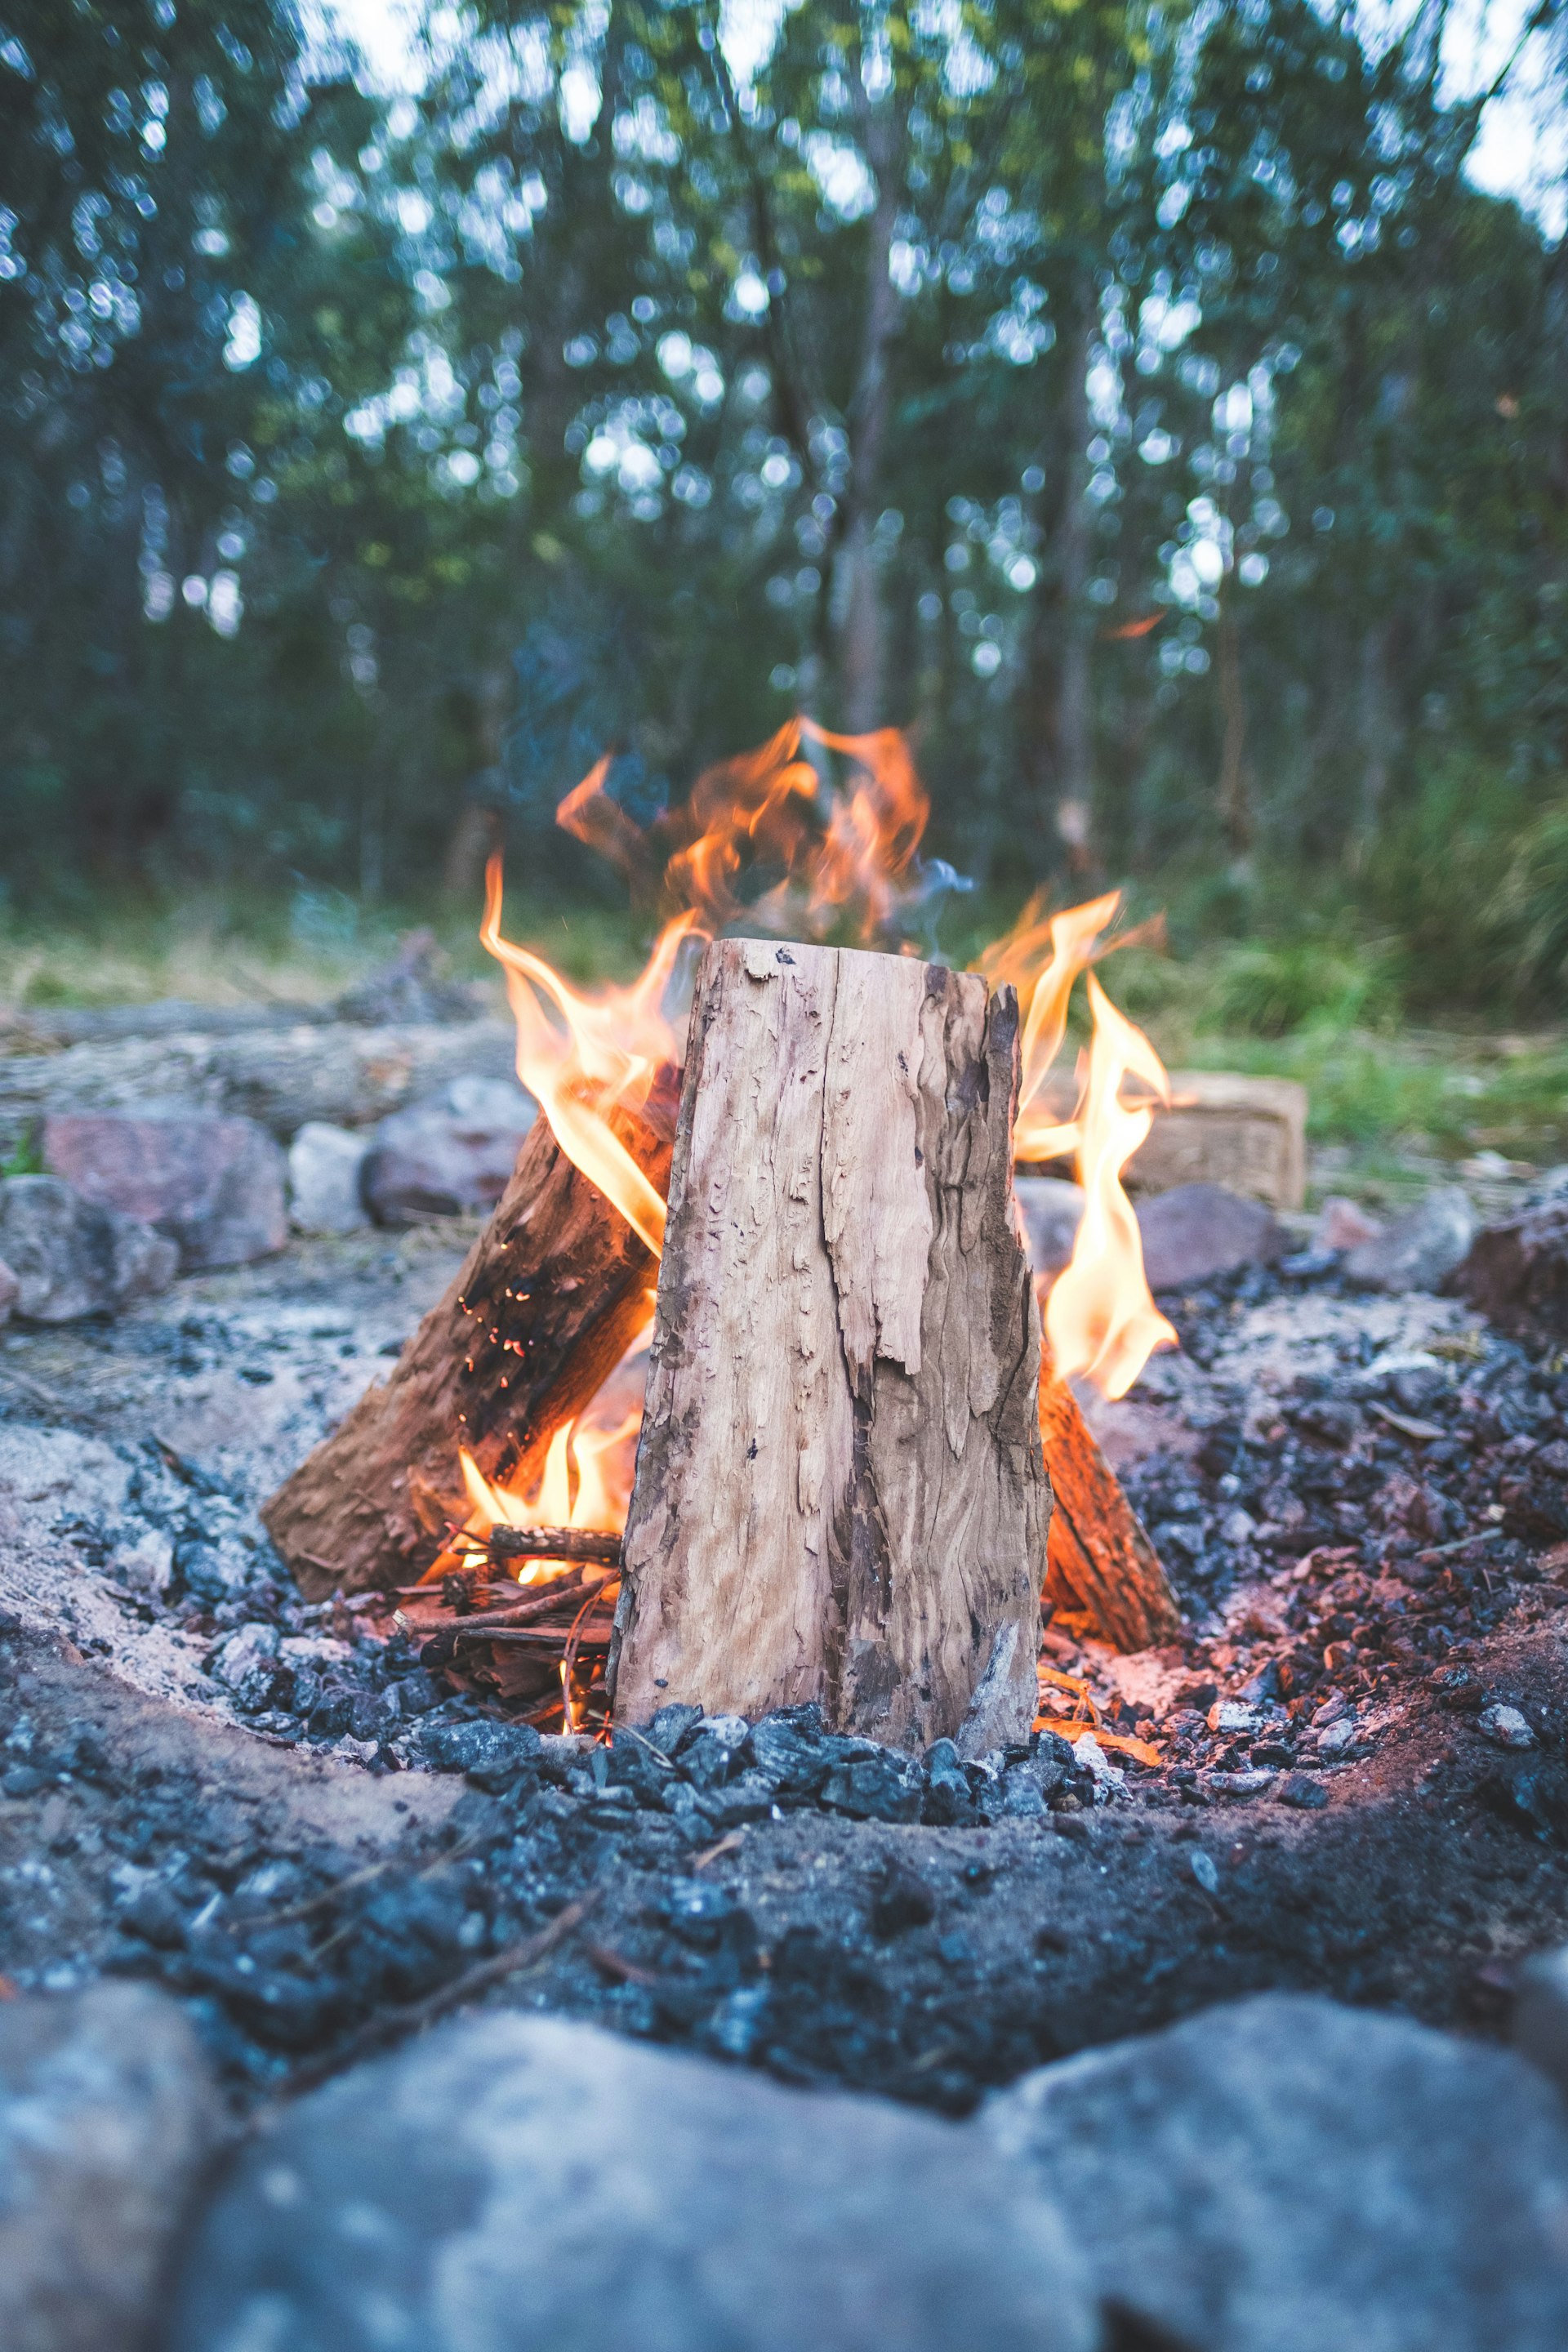 A campfire in the bush, made with large logs in a triangular shape with a stone circle around it